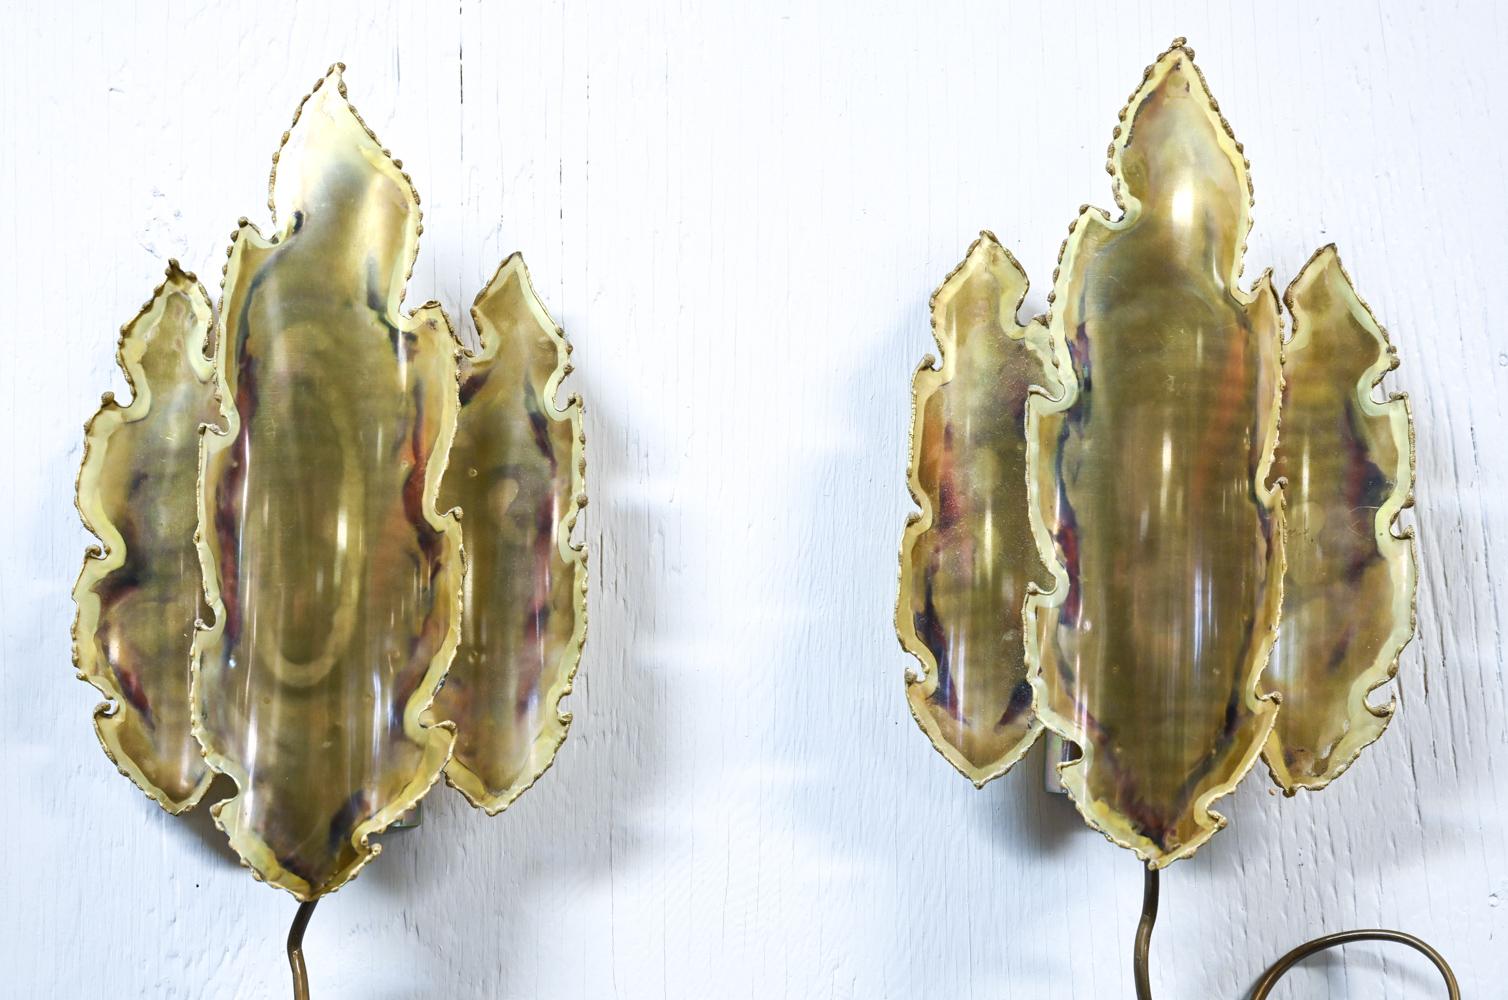 Exceptional pair of Brutalist leaf-form wall sconces in patinated torch-cut brass, designed by Sven Aage Holm Sørensen for Holm Sørensen and Pedersen, produced in the 1960's-1970's. Each sconce marked on wall plate with Holm Sørensen & Pedersen